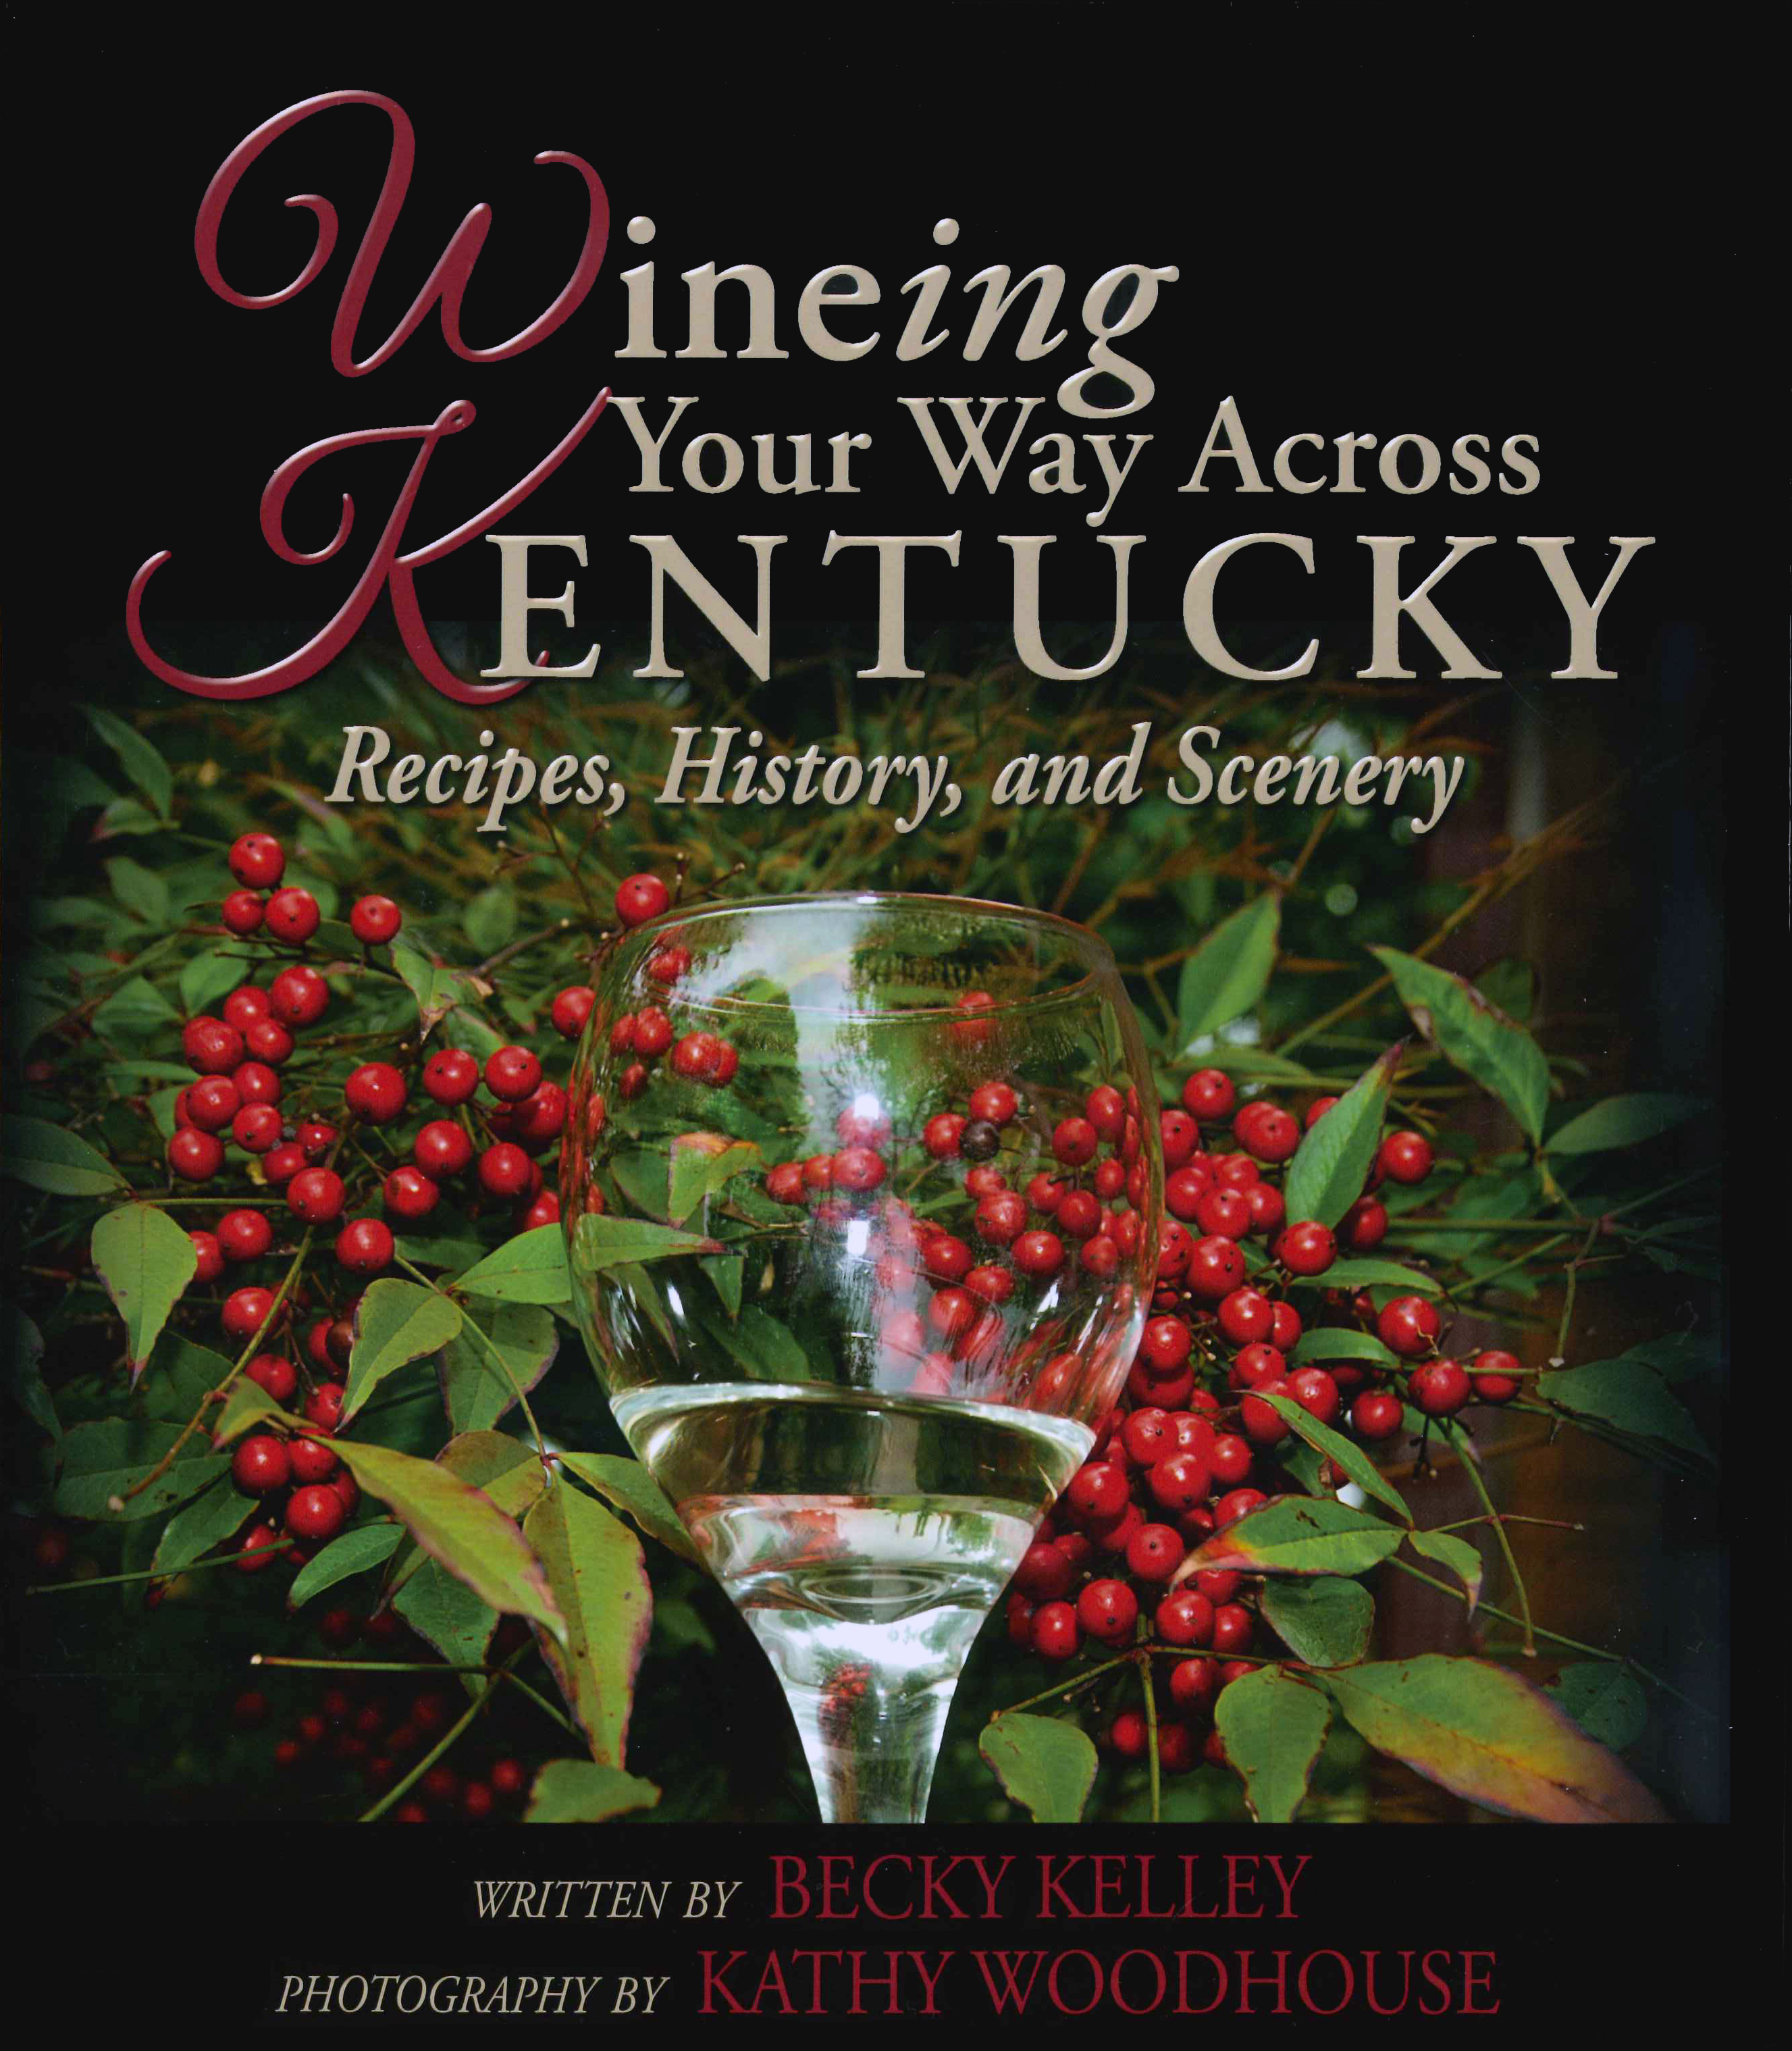 Book cover to Wineing Your Way Across Kentucky, Recipes, History, and Scenery